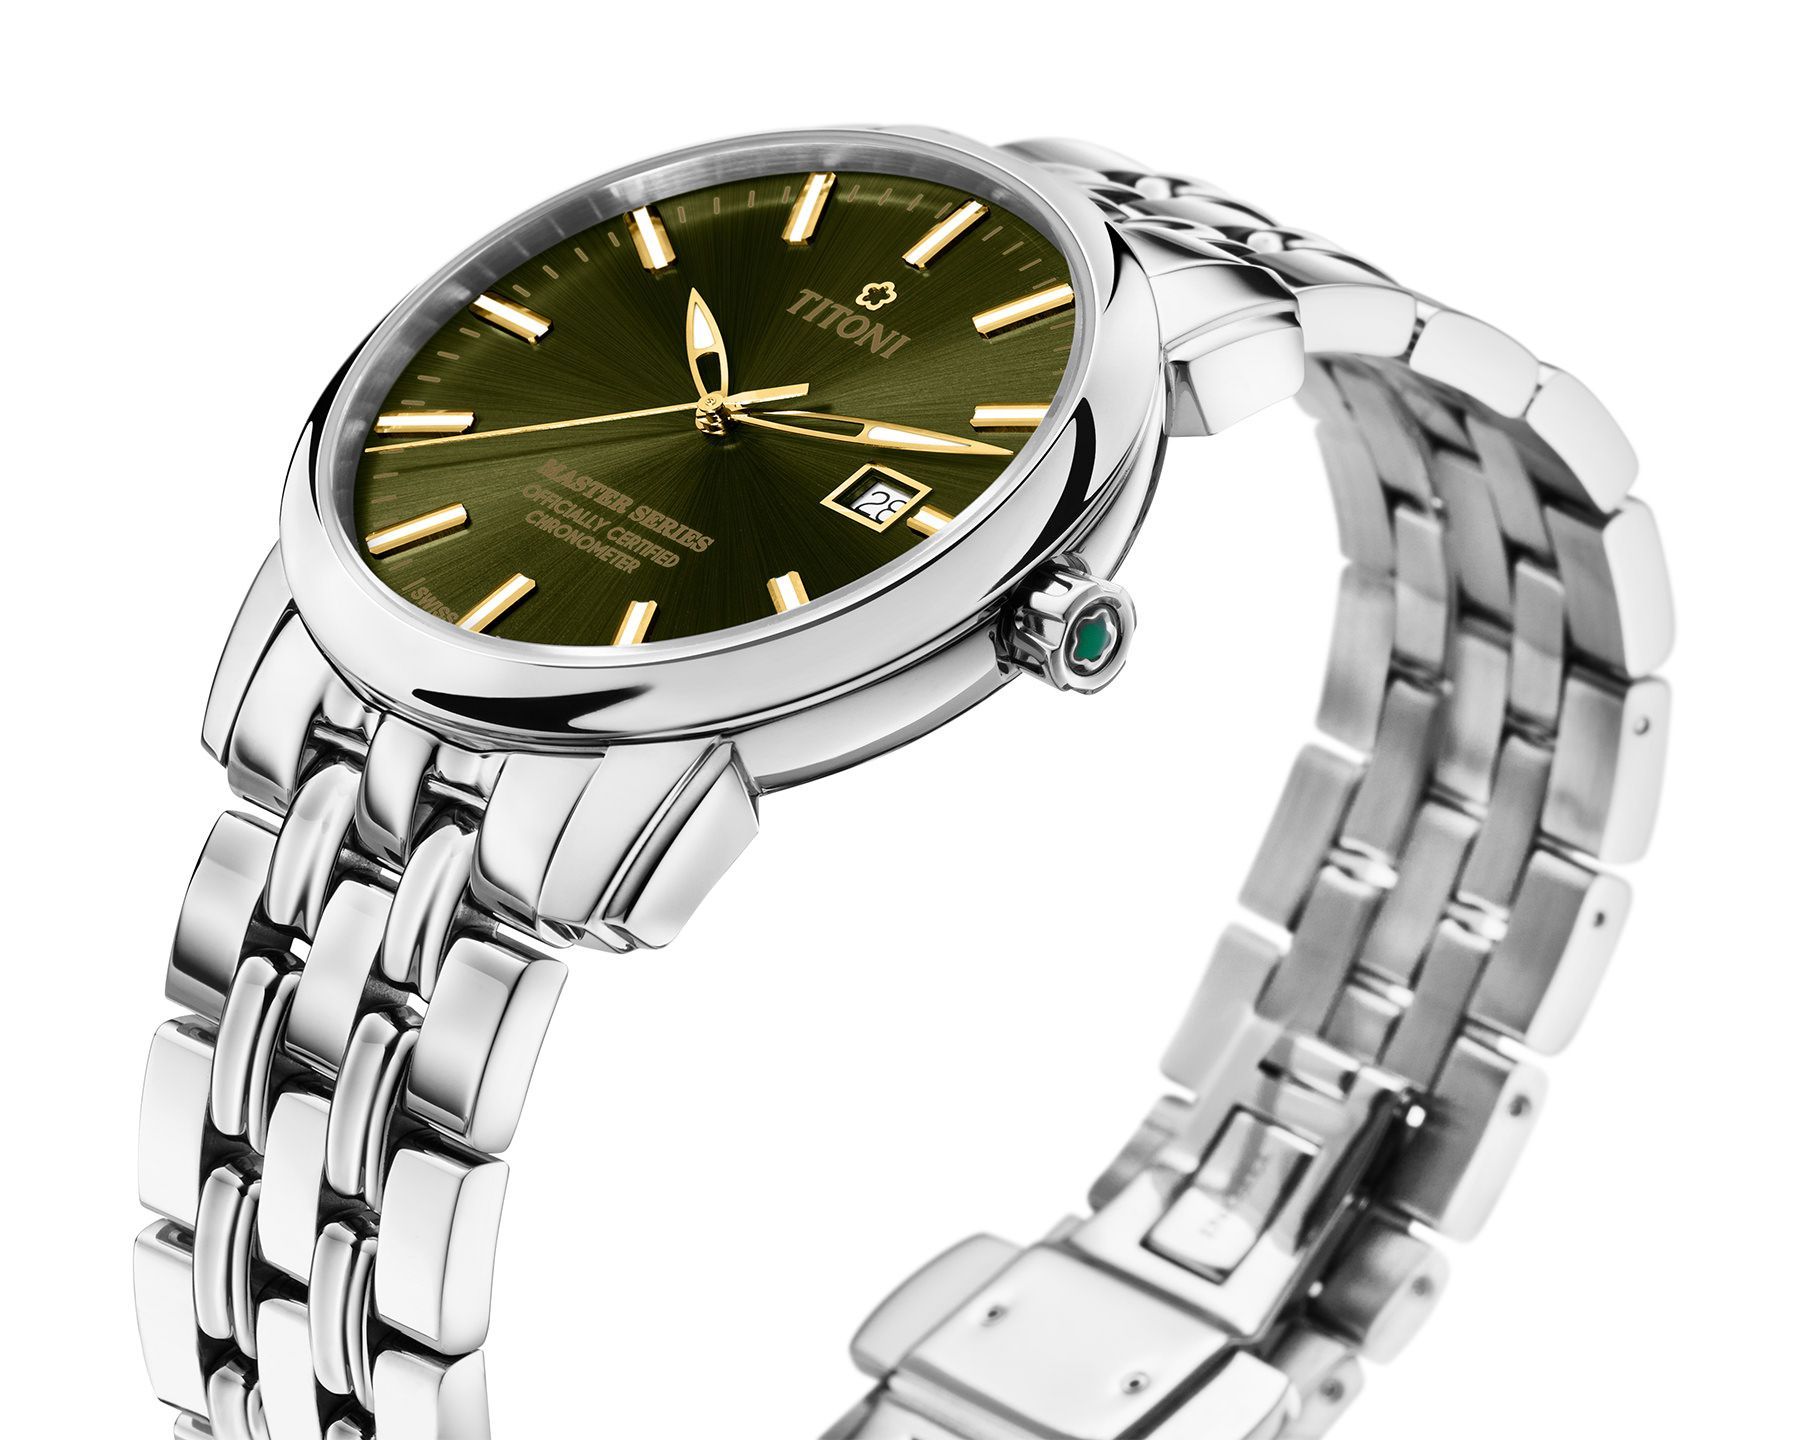 Titoni Master Series  Green Dial 41 mm Automatic Watch For Men - 3